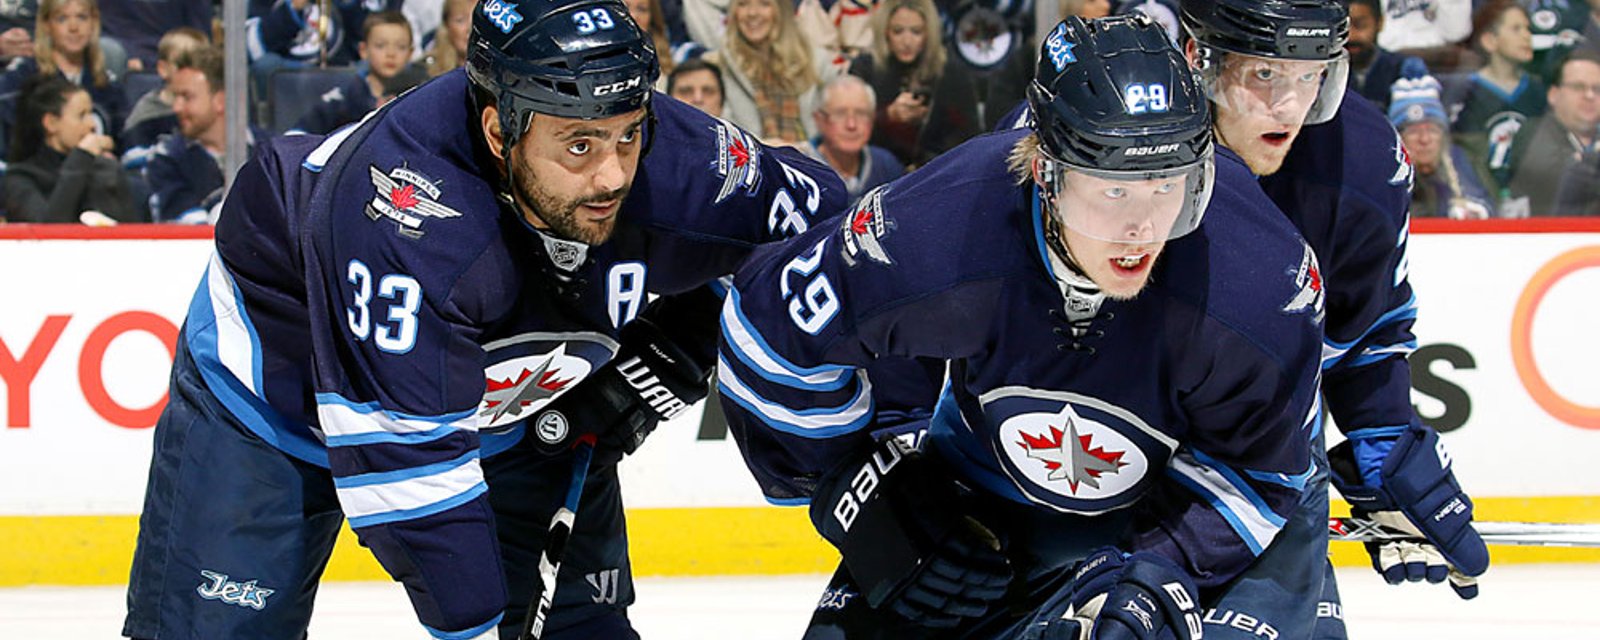 Laine throws Byfuglien under the bus after latest report